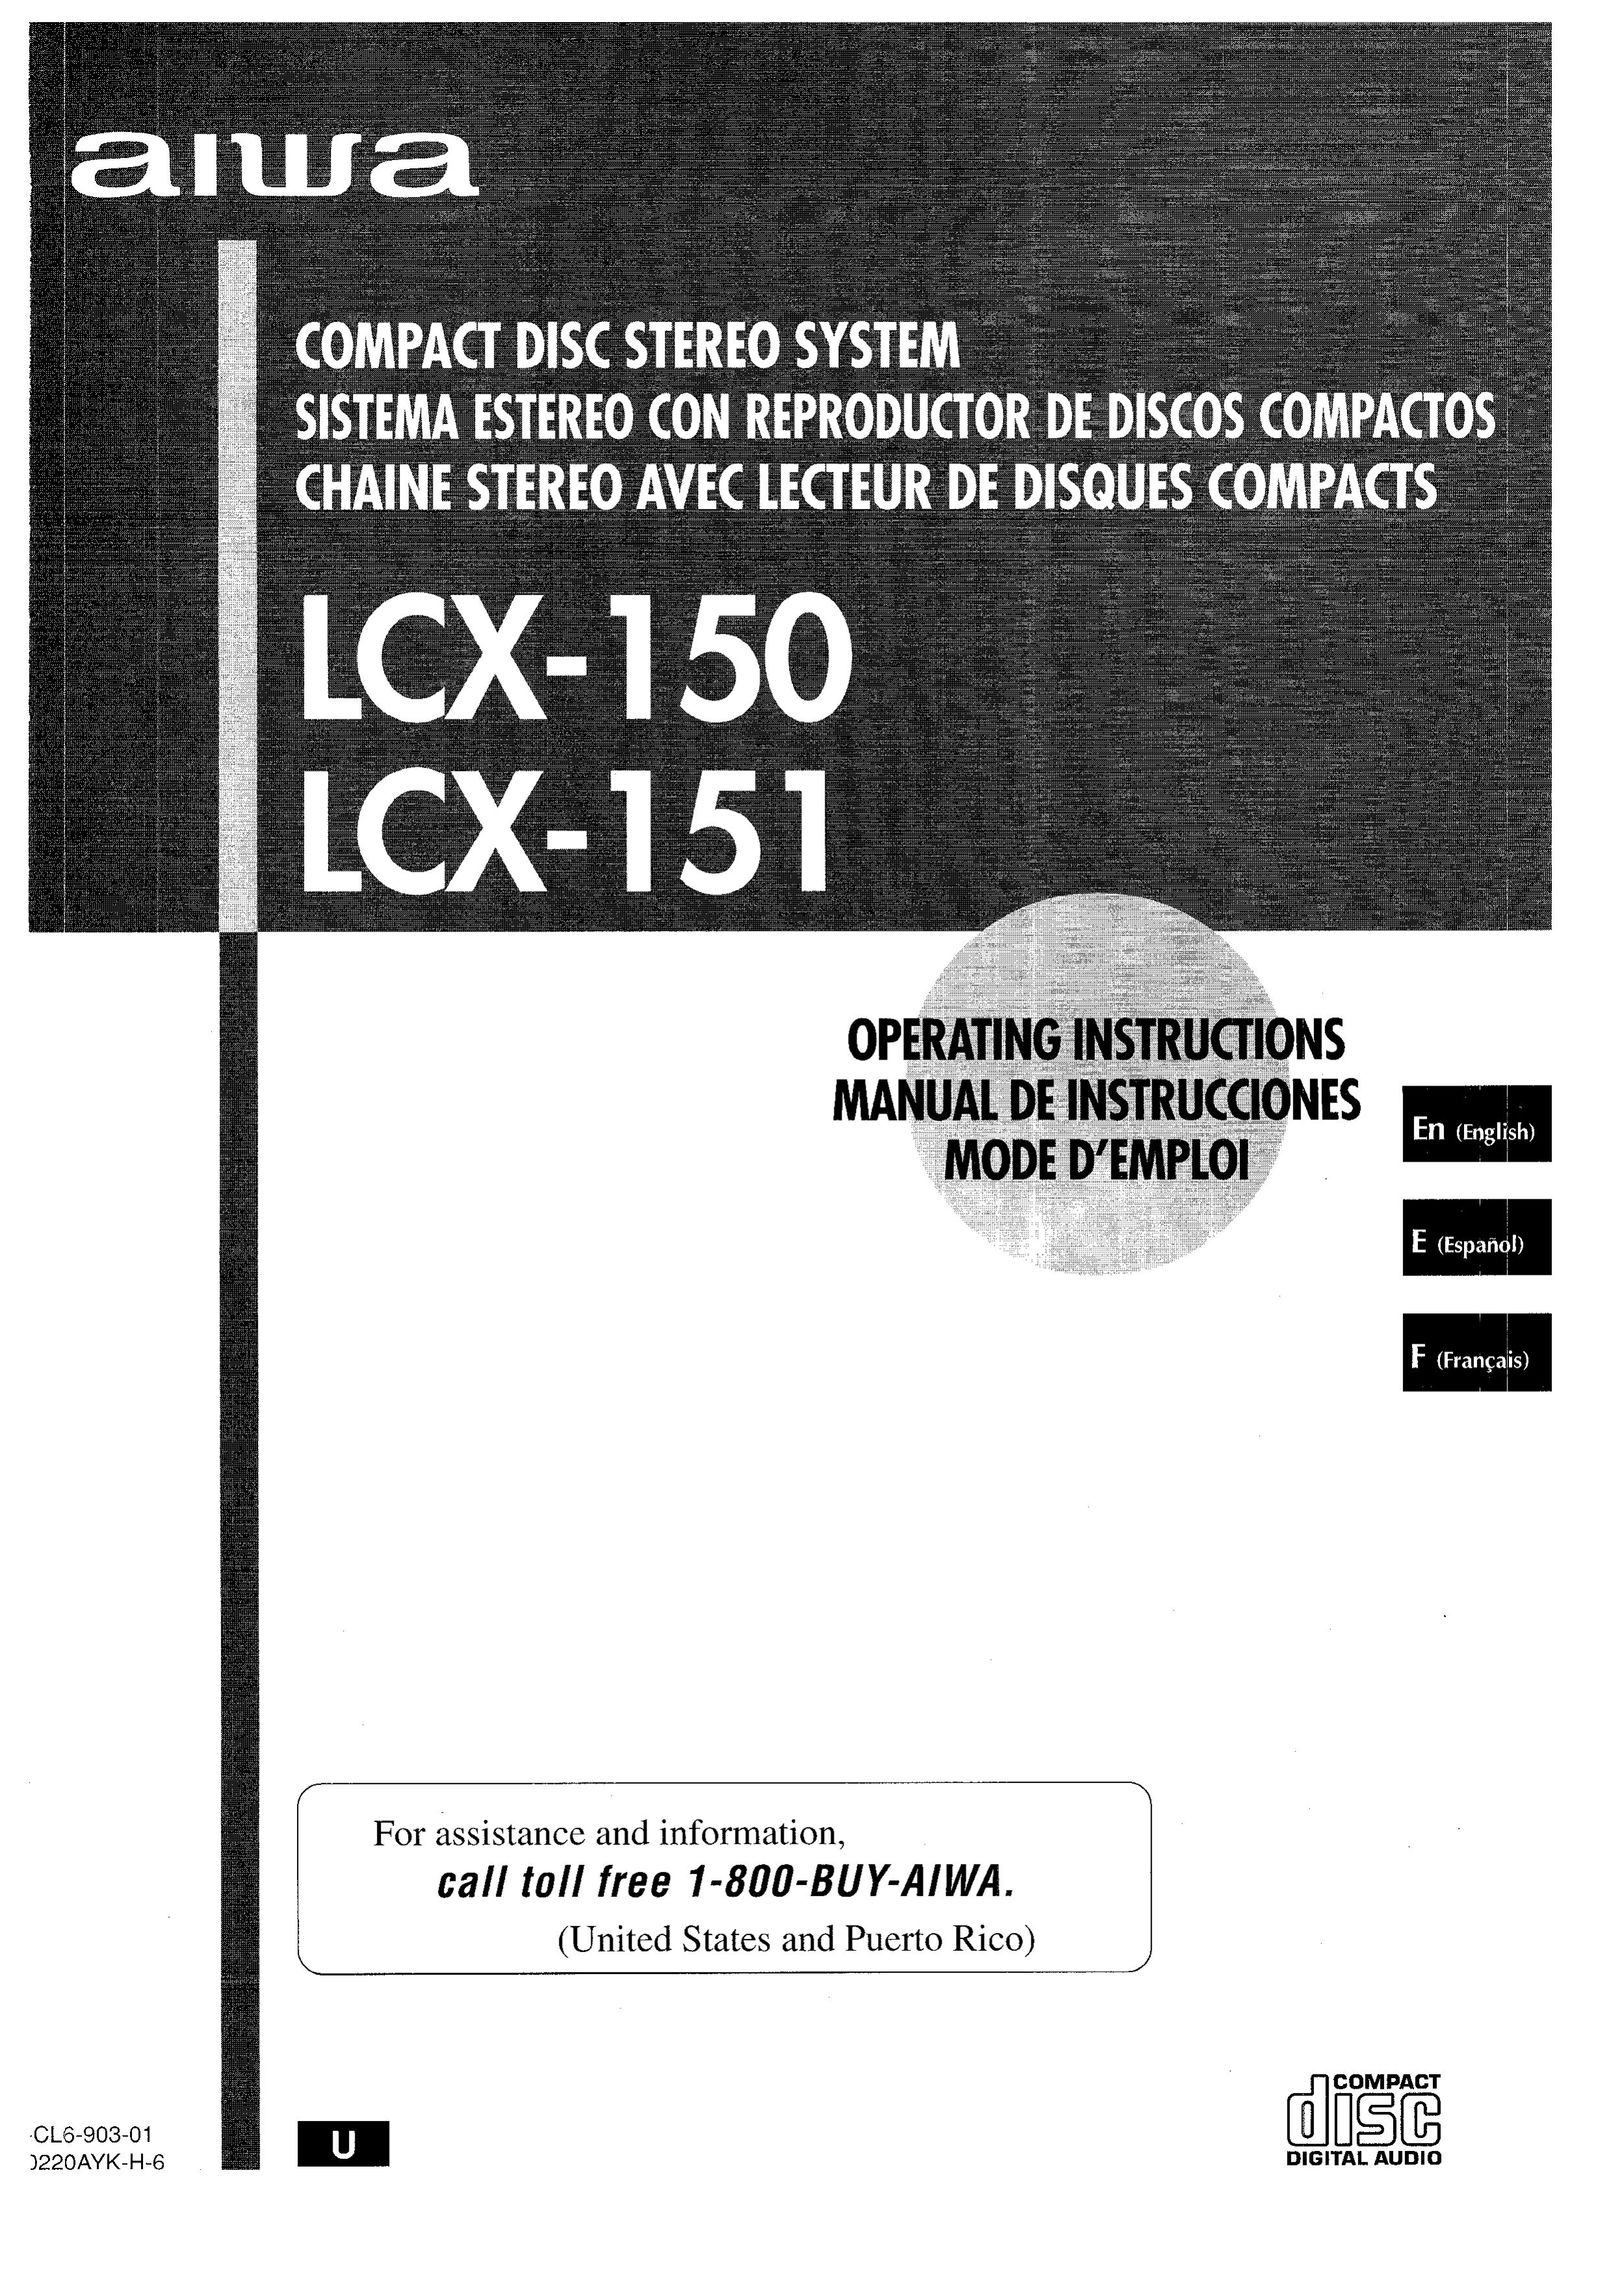 Aiwa LCX-150 Stereo System User Manual